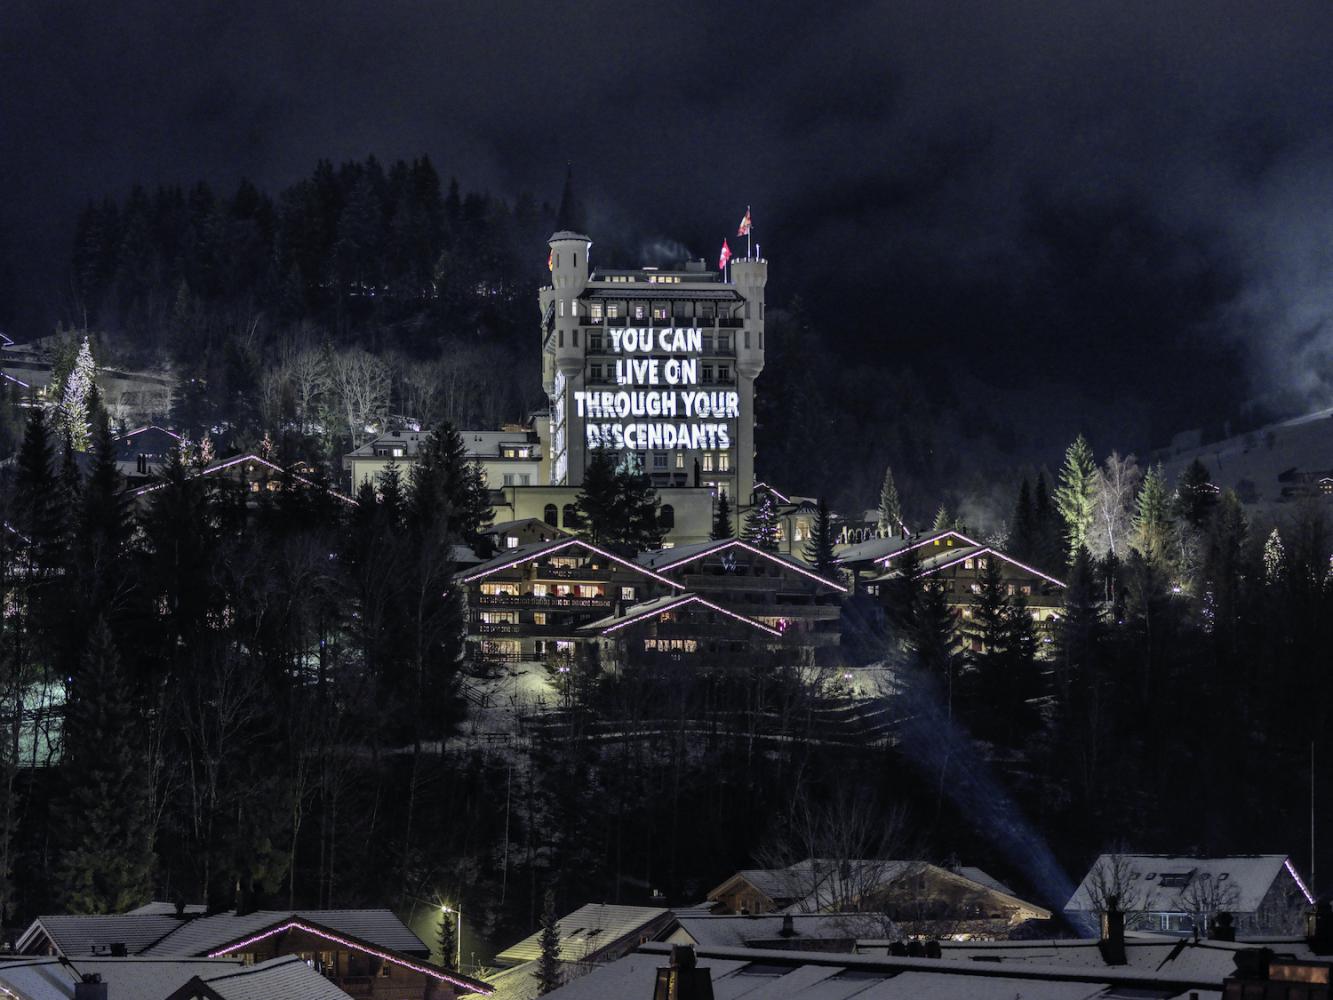 Projektion am Hotel Palace in Gstaad: Jenny Holzer "A LITTLE KNOWLEDGE CAN GO A LONG WAY, 2019, 